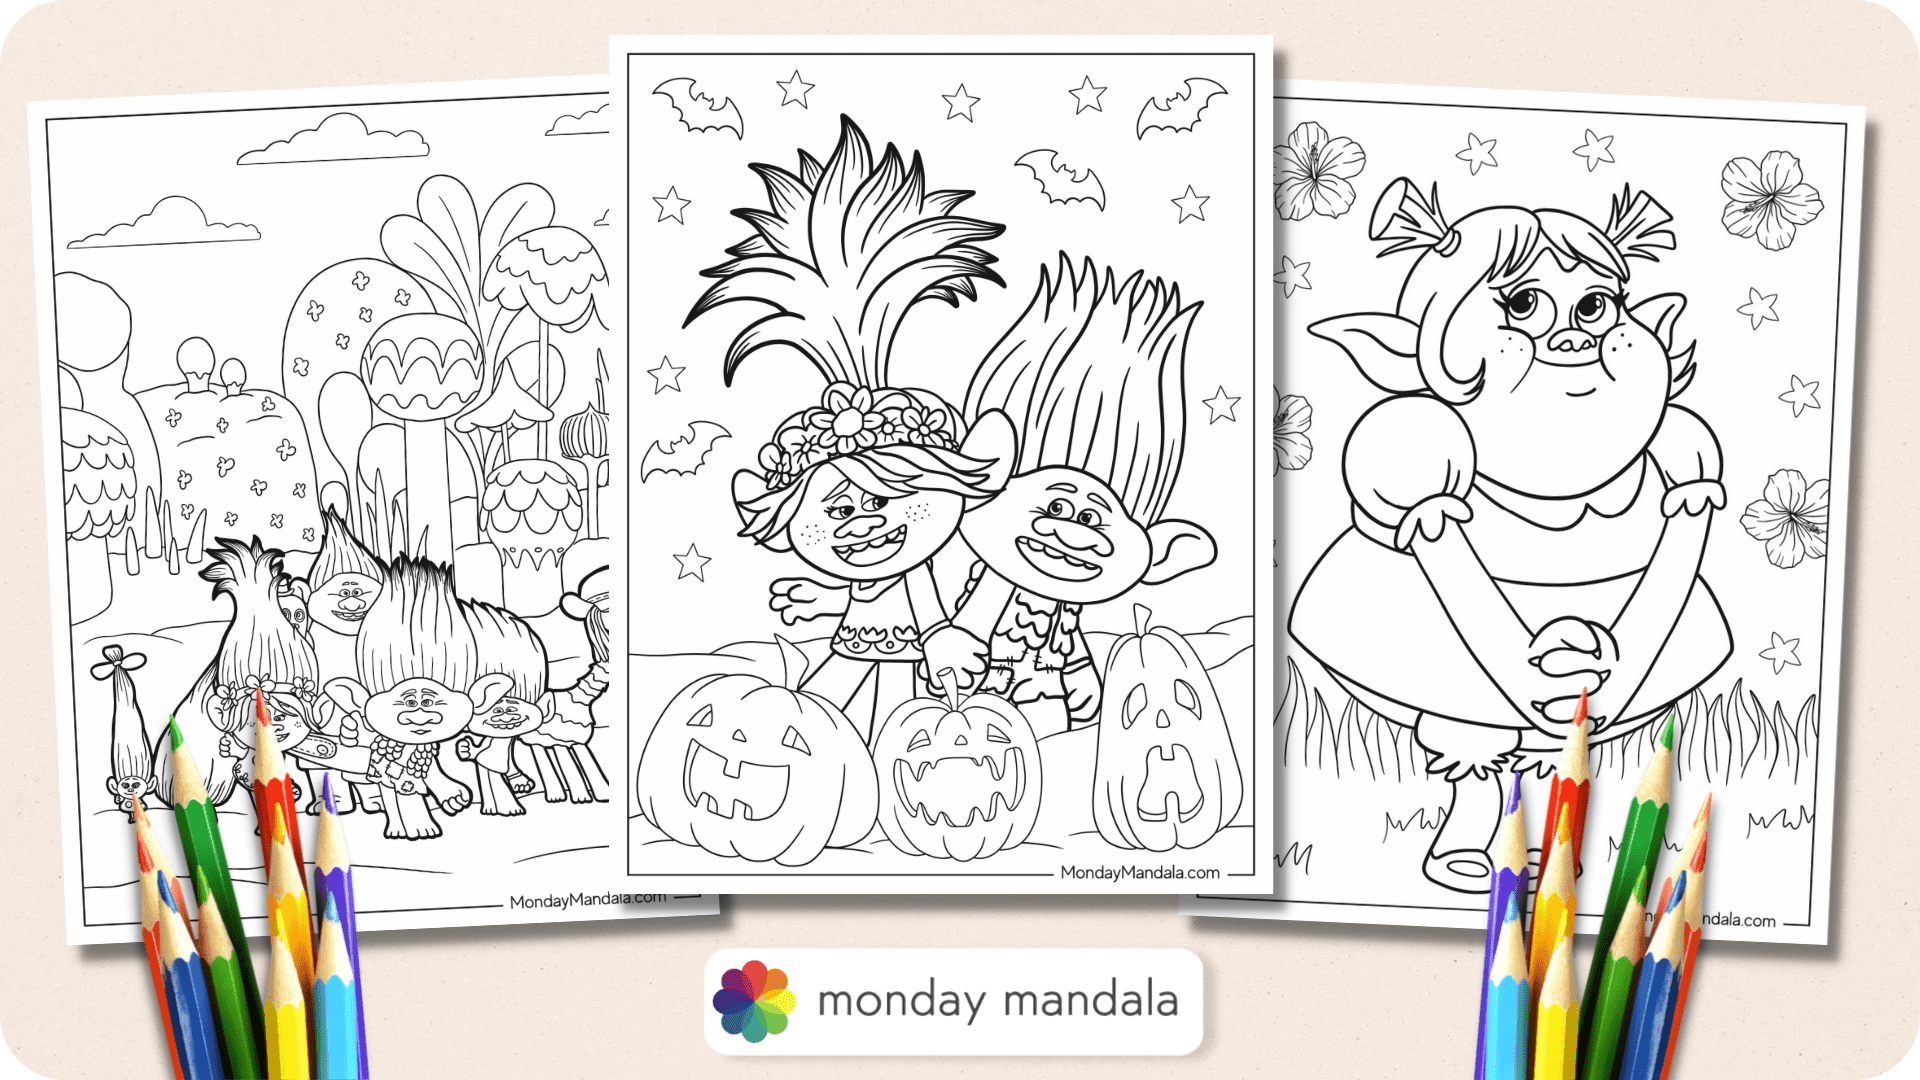 Trolls coloring pages free pdf printables